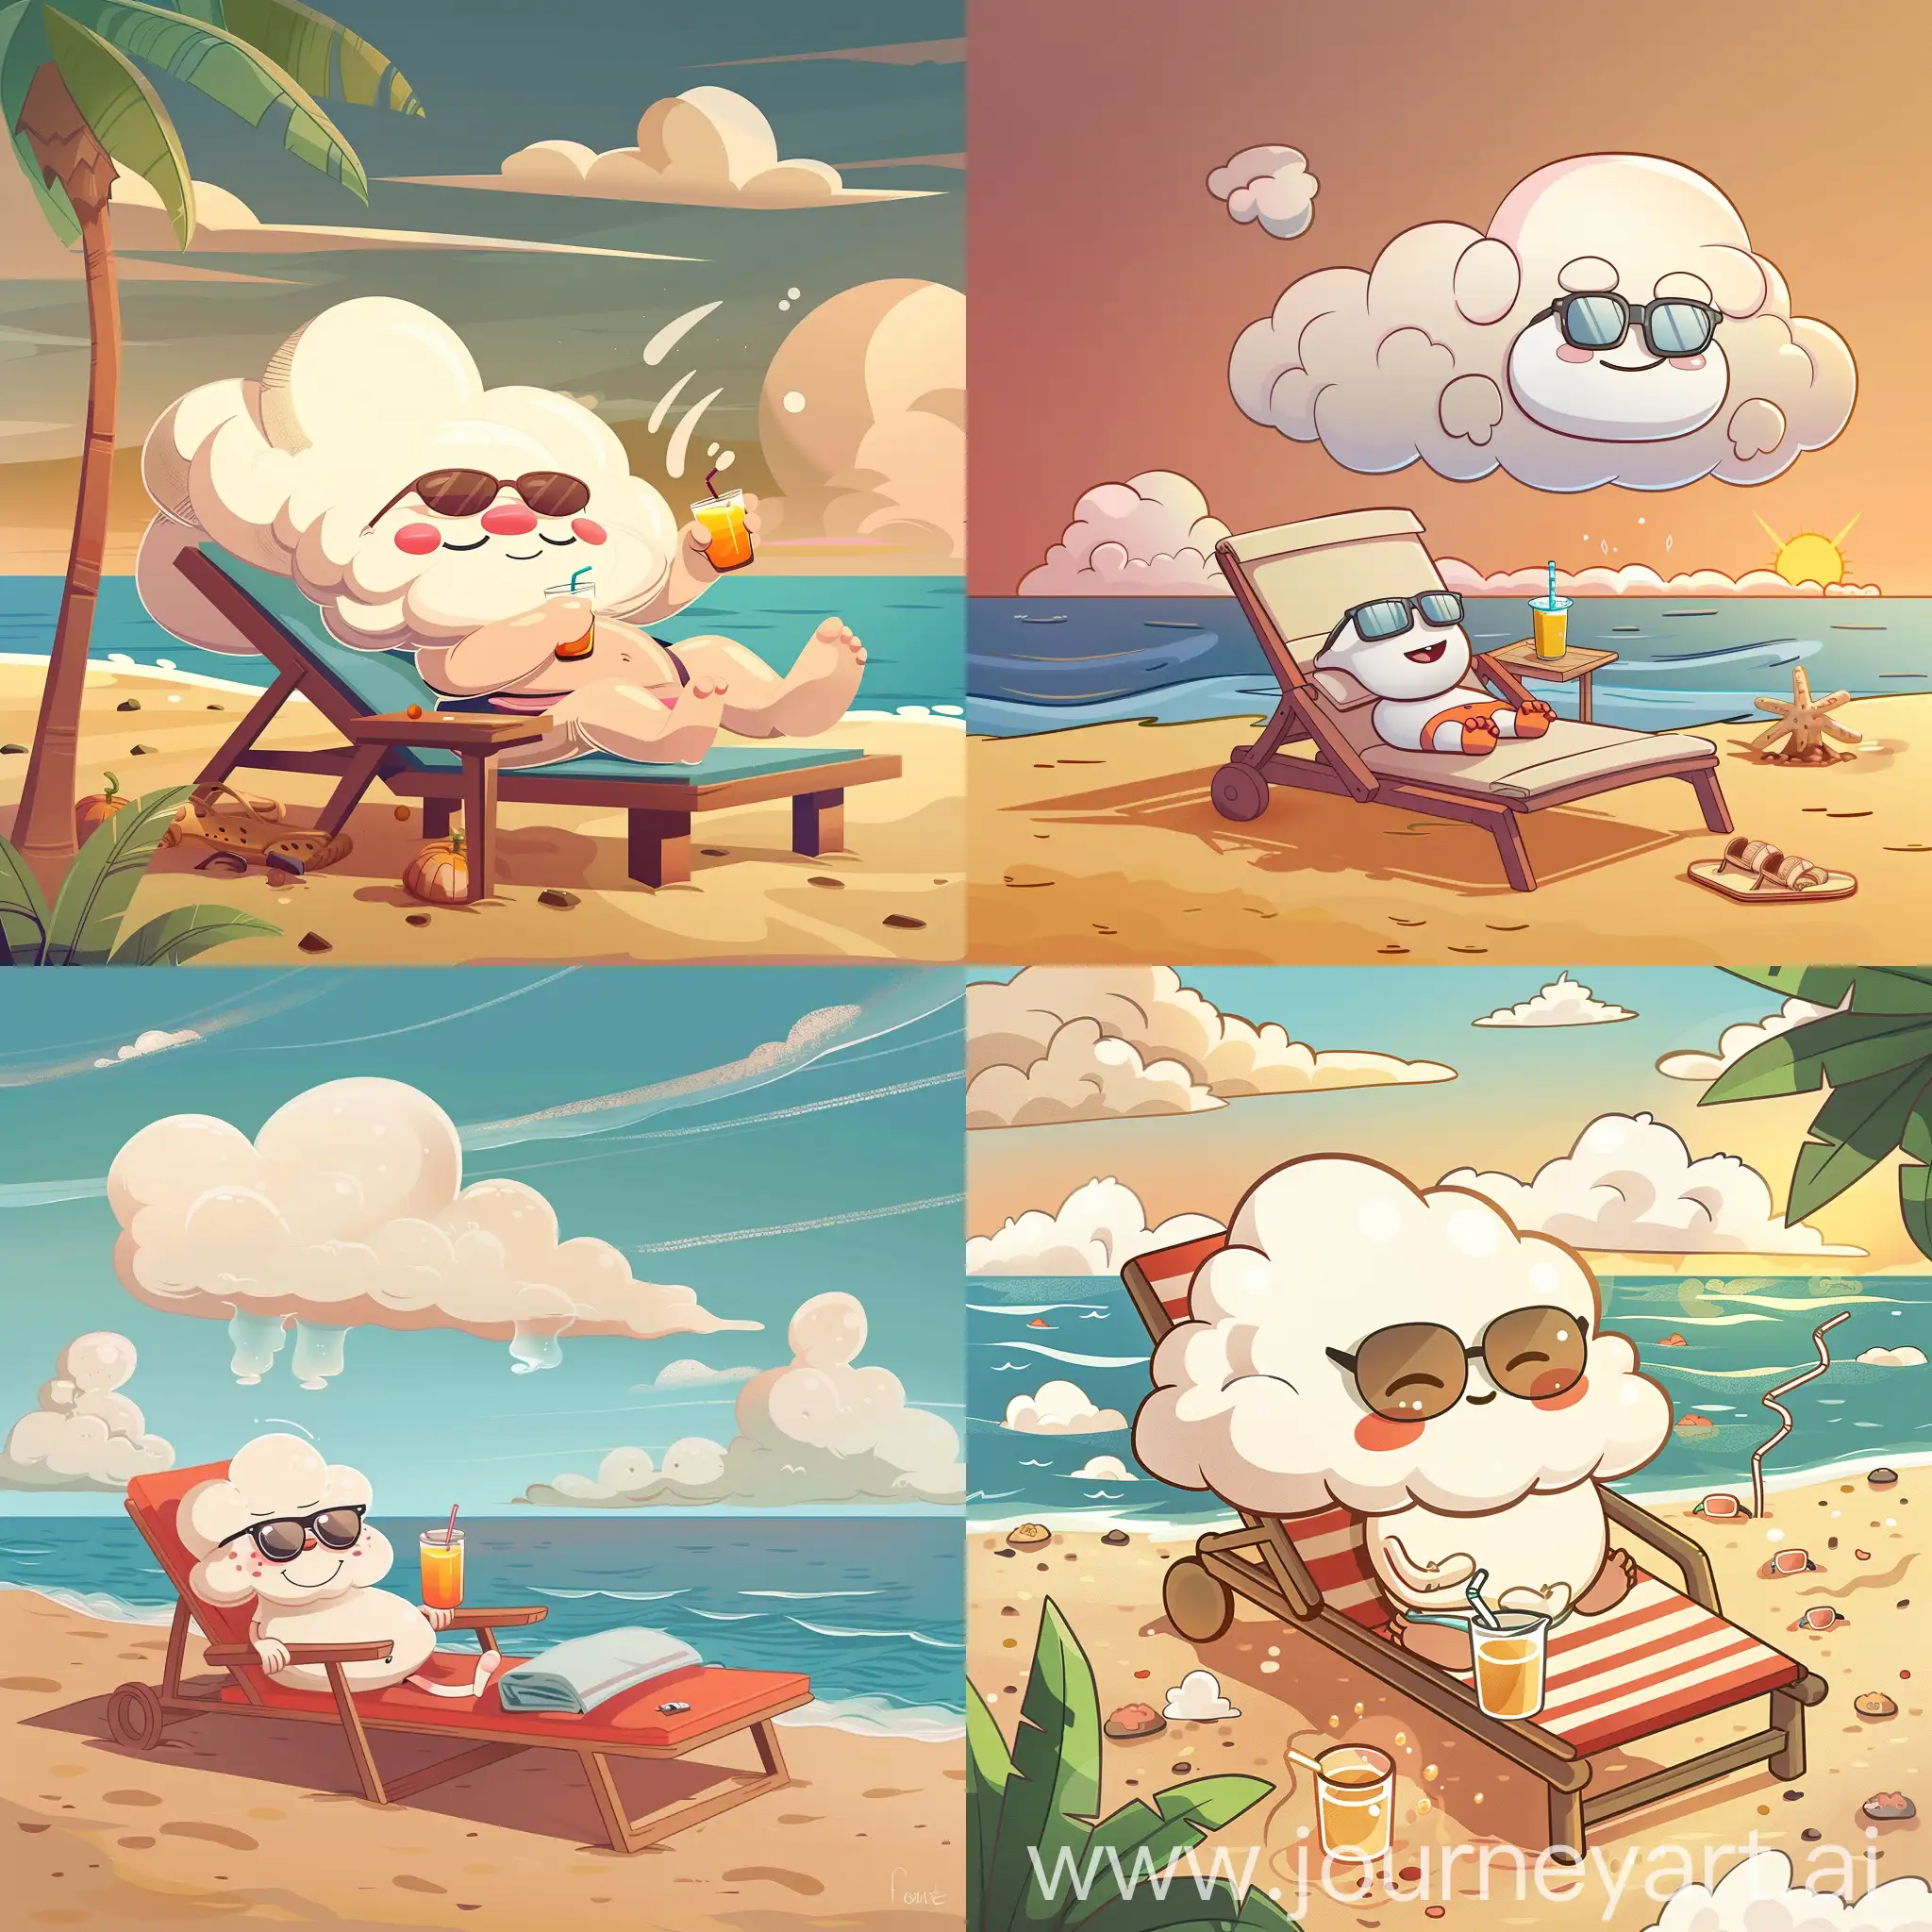 Cartoon illustration, anthropomorphic, a chubby cloud with sunglasses, drinking juice, lying on a lounge chair by the sea. Sunbathing, cute drawing style, warm colors, flat illustration 